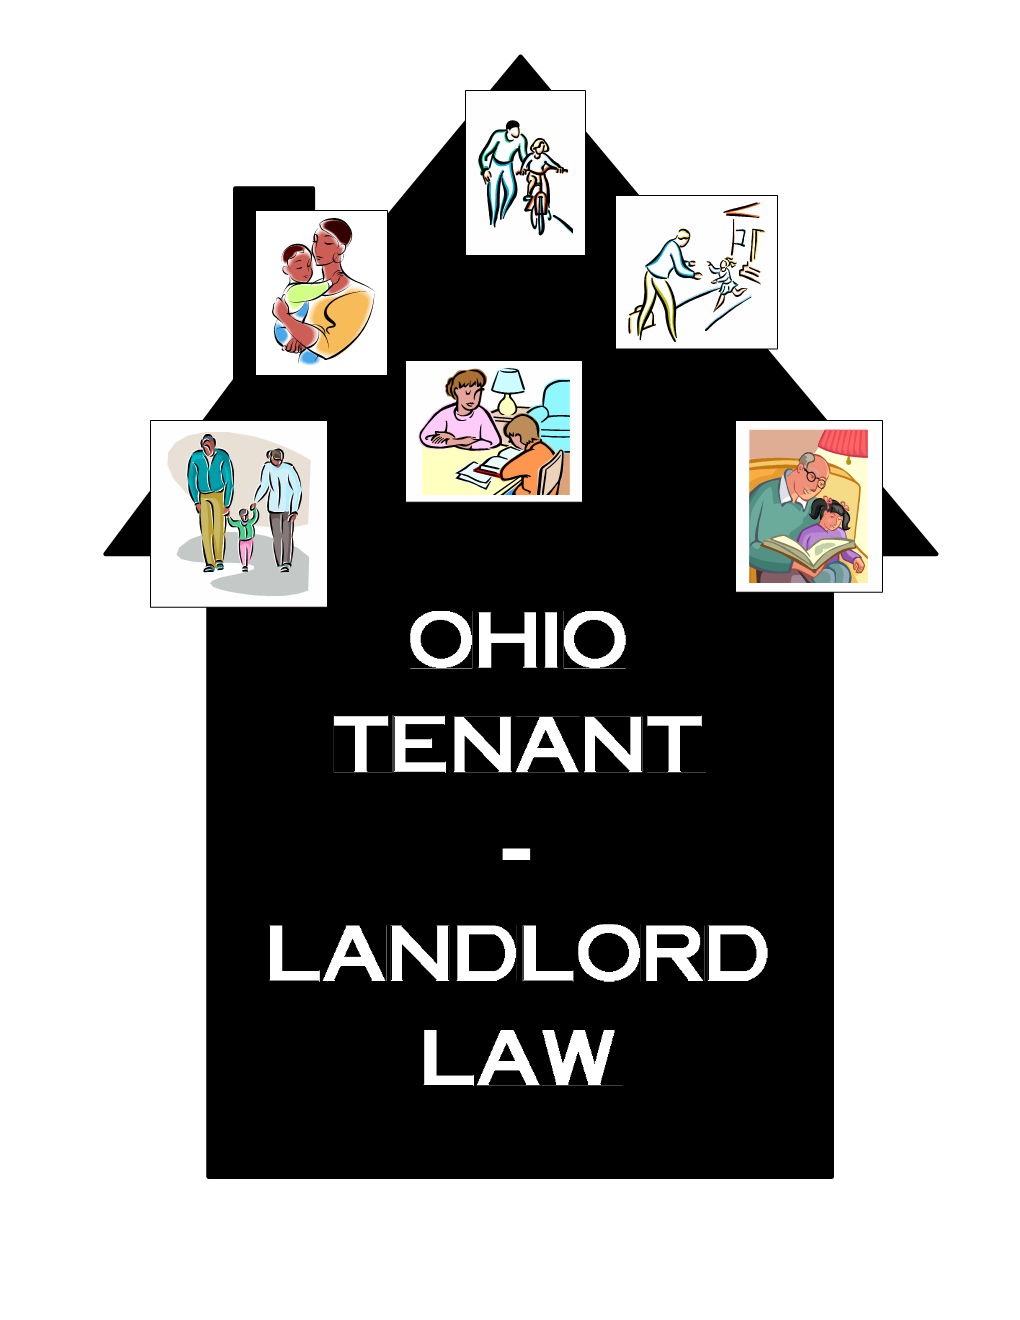 Ohio Tenant-Landlord Law, Effective November 4, 1974, Applies to Most Landlord-Tenant Relationships and Governs Most Rental Agreements Whether Oral Or Written